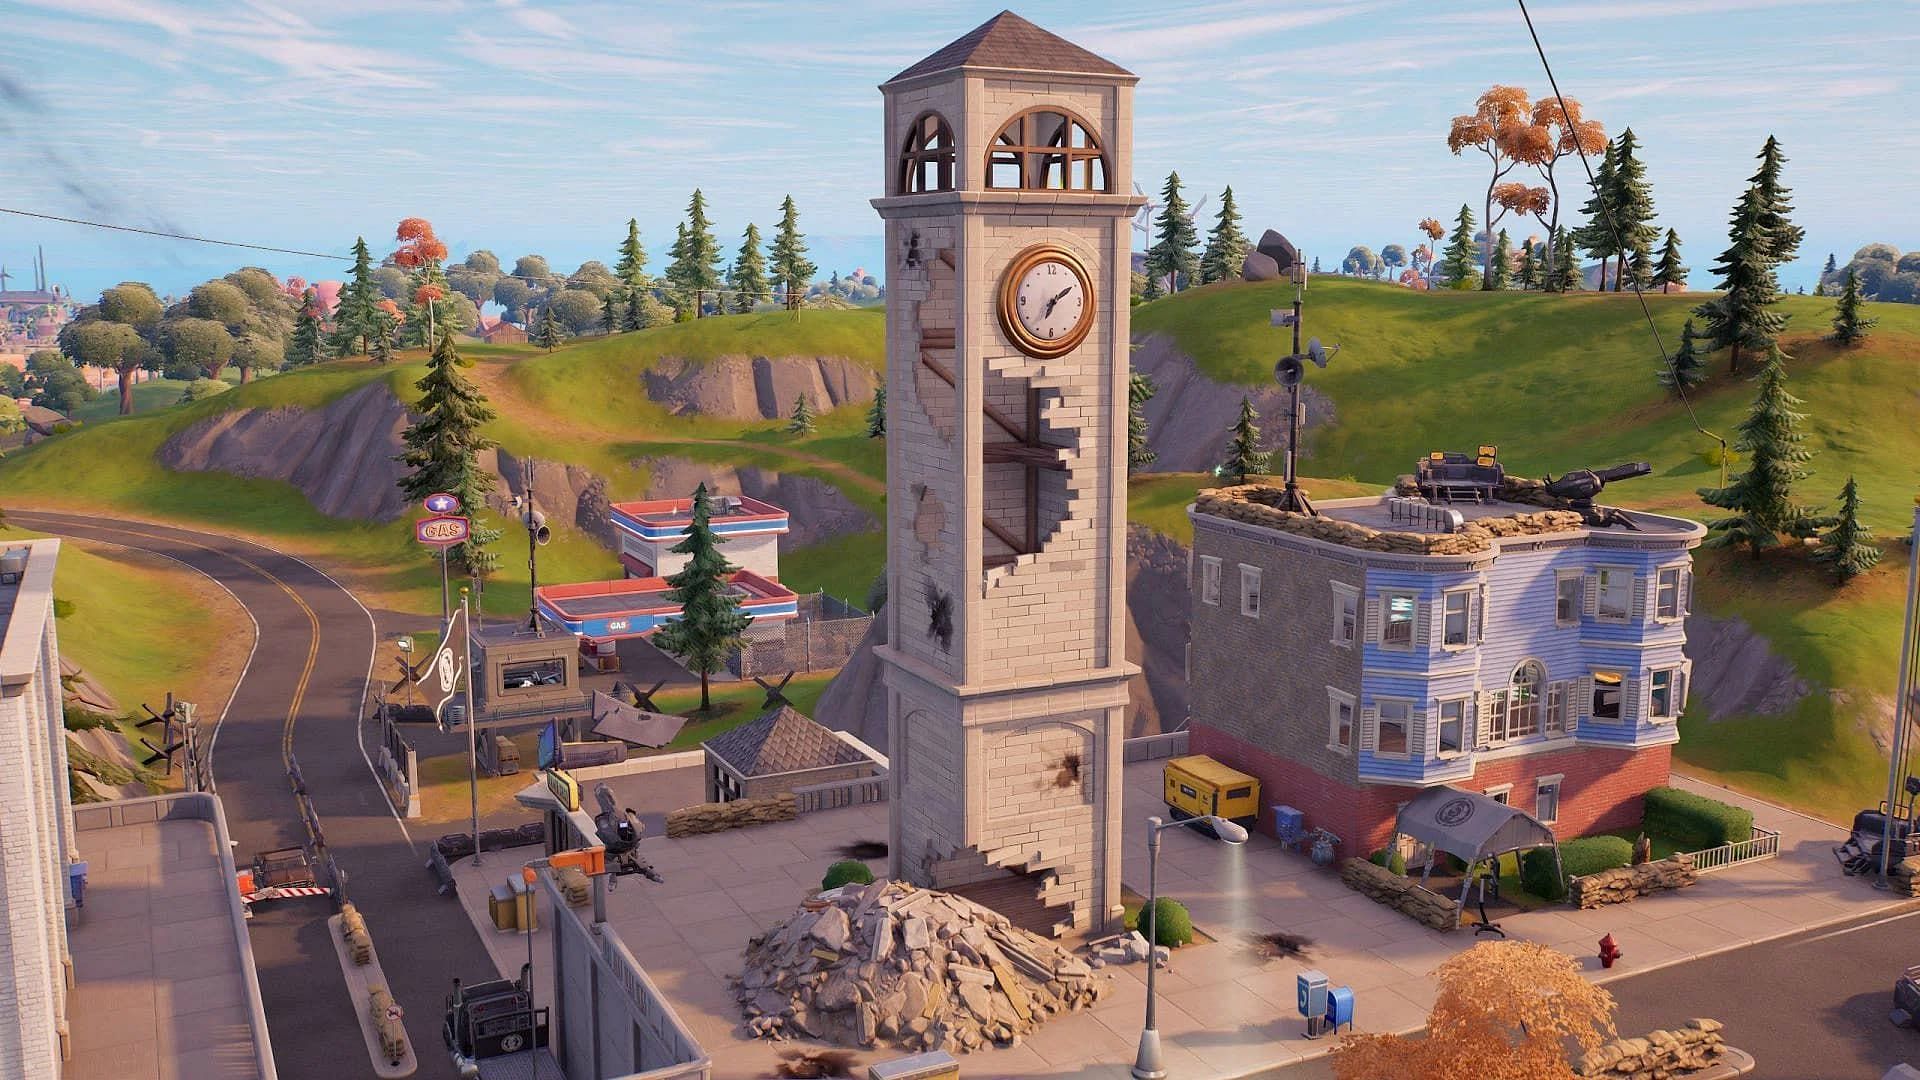 This is how Tilted Towers used to look during Chapter 3 Season 2. (Image by newpakweb.com)